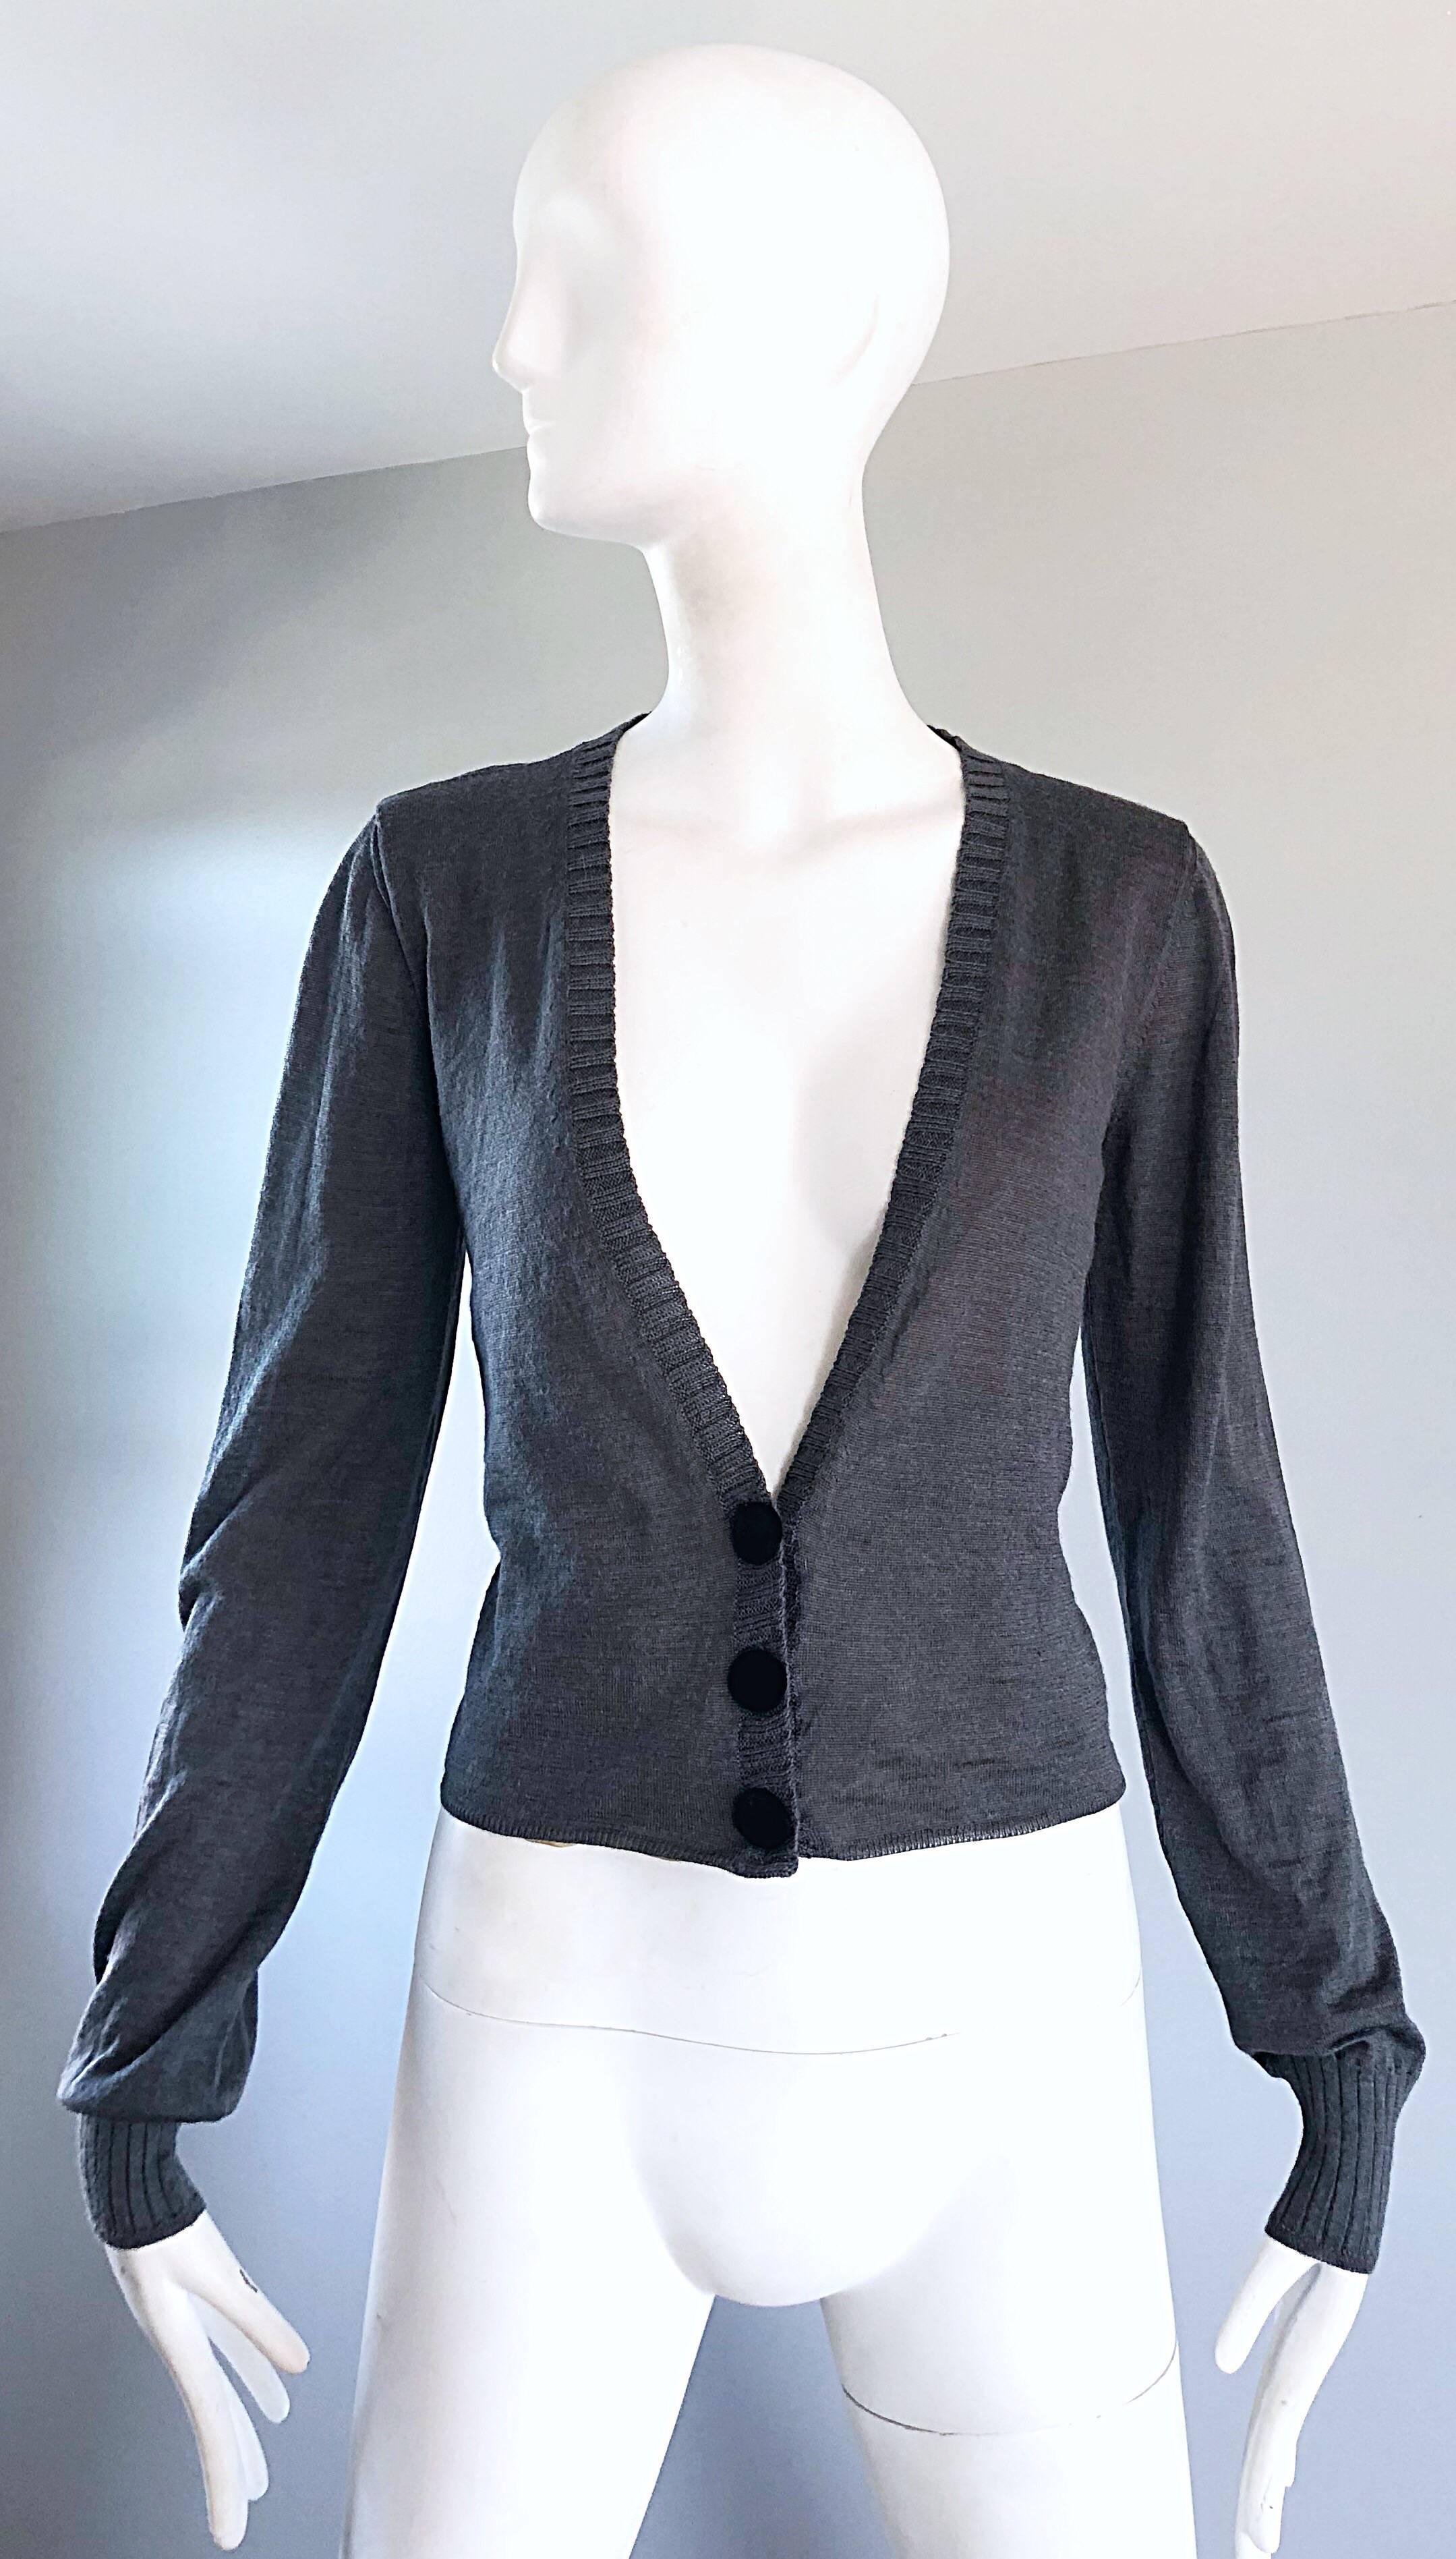 Classic LANVIN, by ALBER ELBAZ Hiver 2006 charcoal gray alpaca and silk blend lightweight cardigan sweater! Smart tailored fit stretches to fit. Three black velvet buttons up the front. Fully lined in nude silk. Perfect weight for layering, and is a